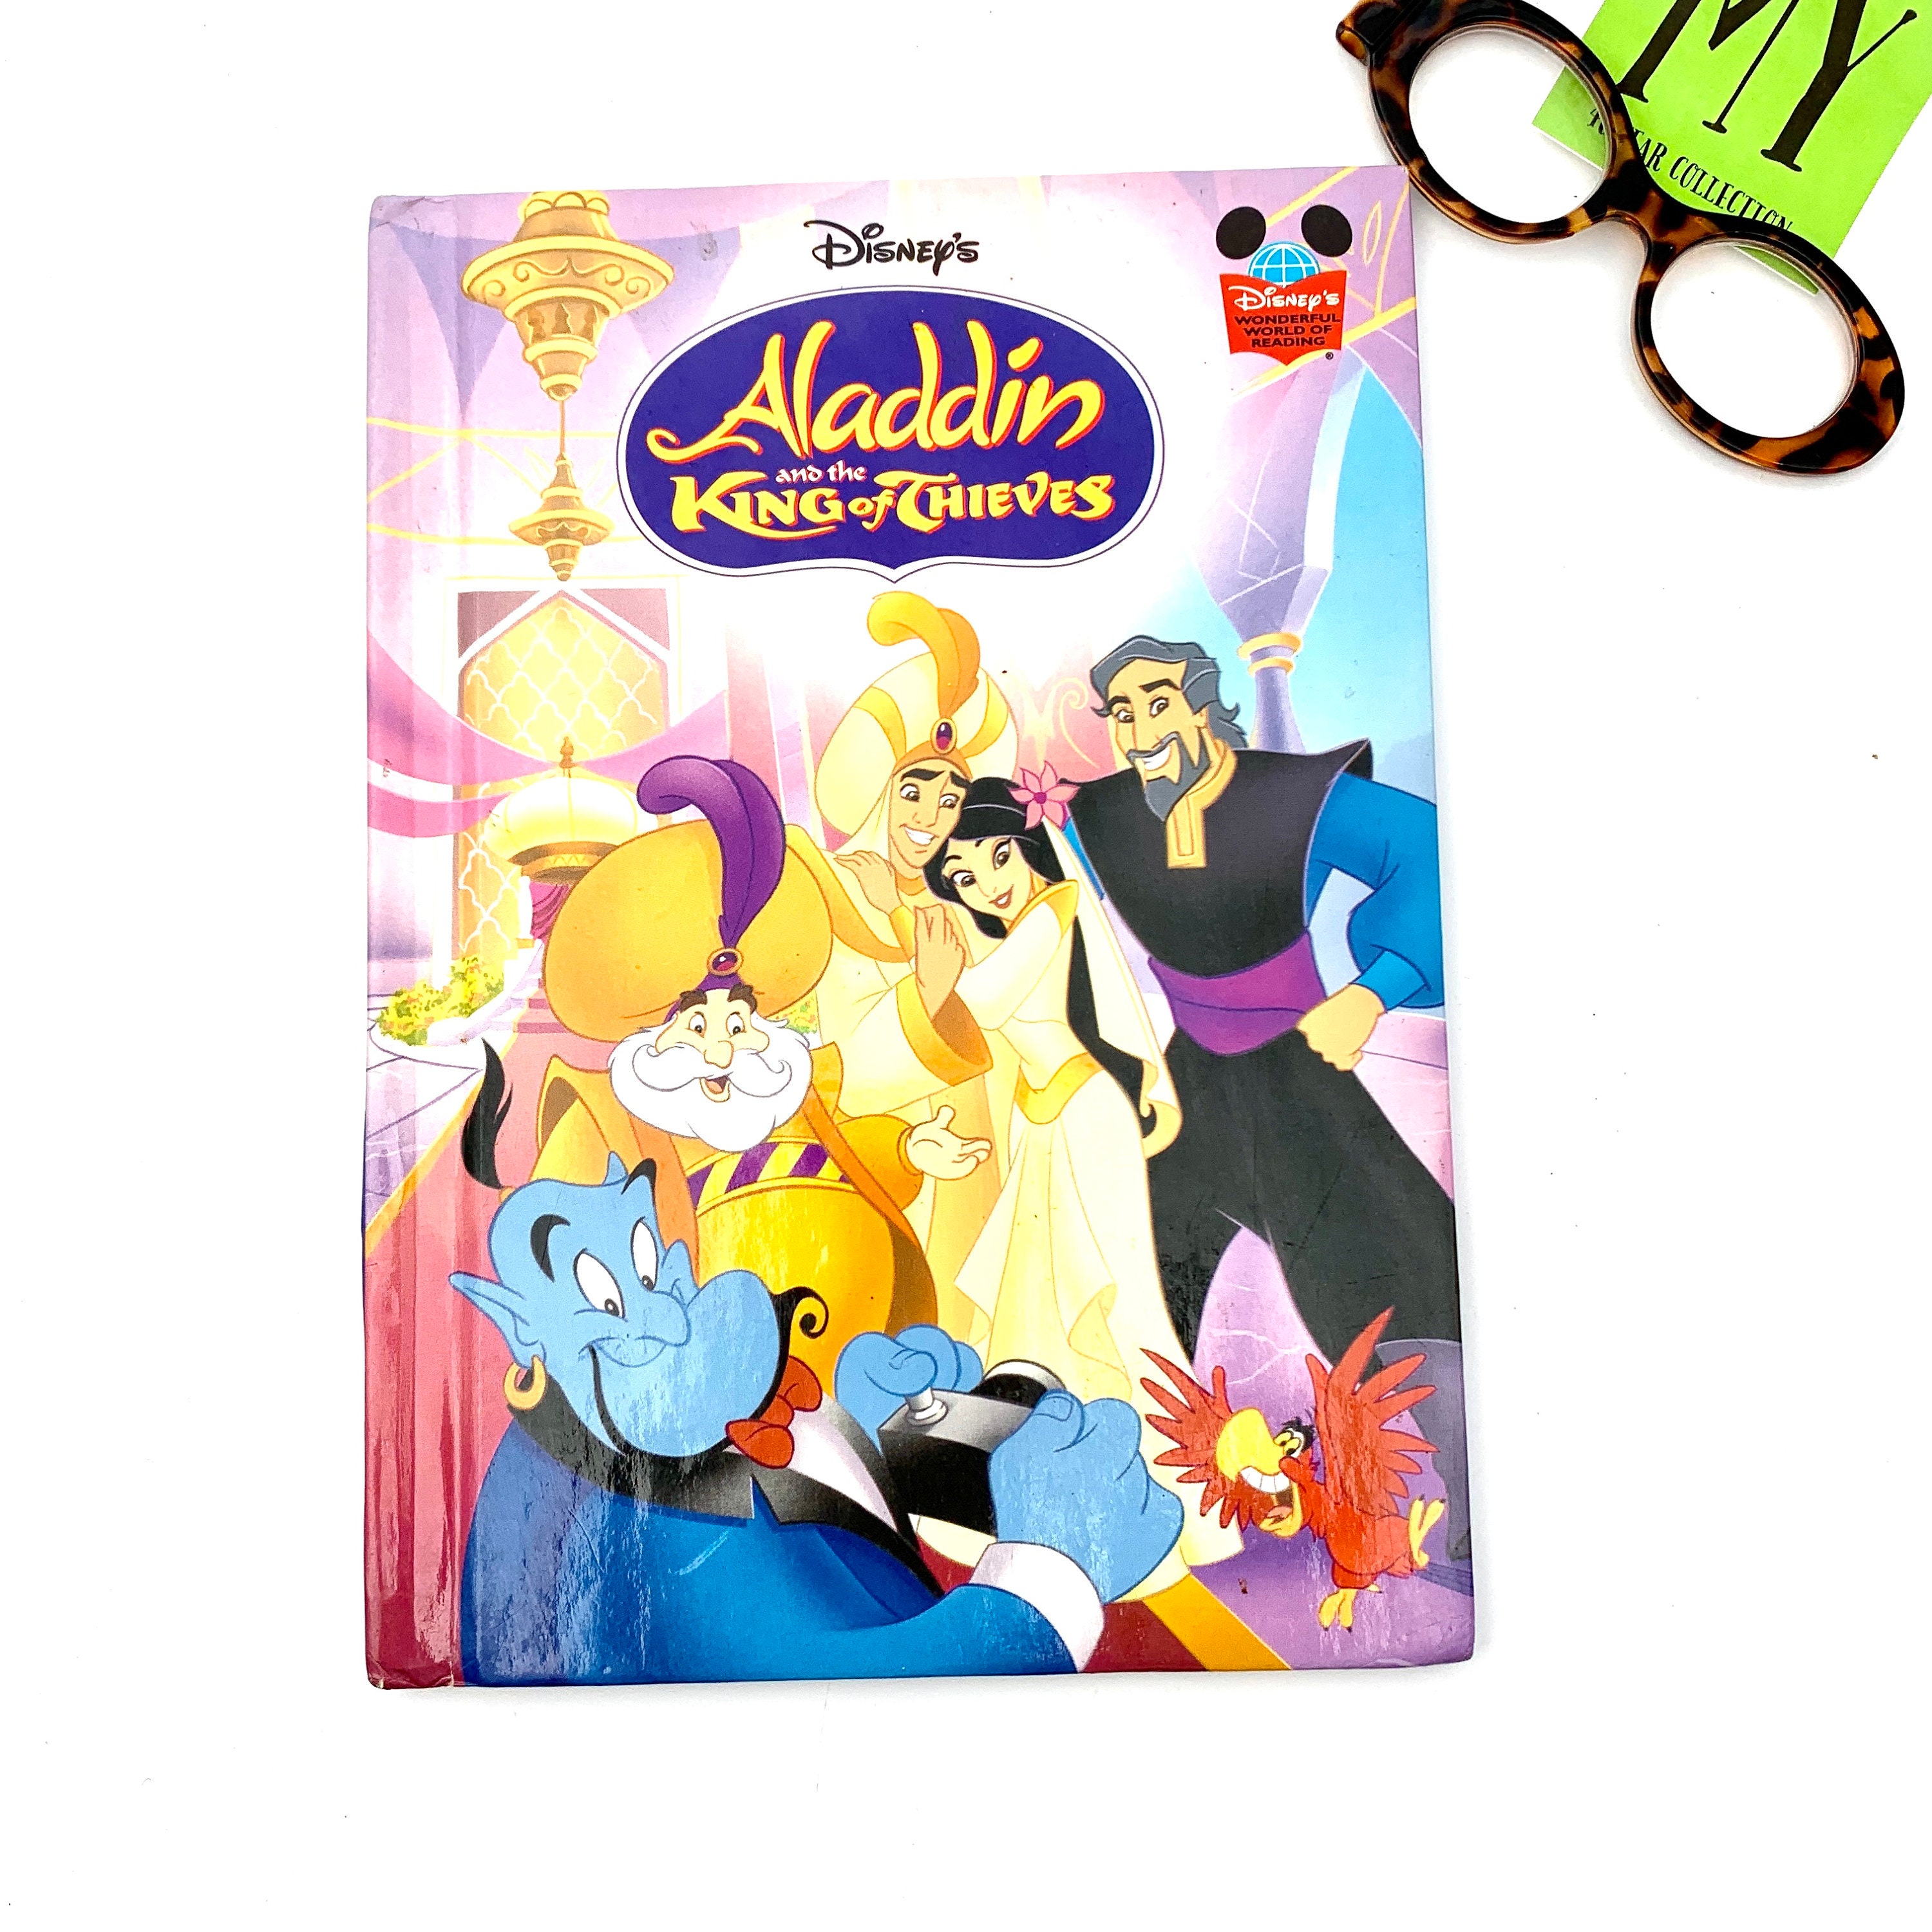 1996 Aladdin And The King Of Thieves Disney S Wonderful Etsy 日本